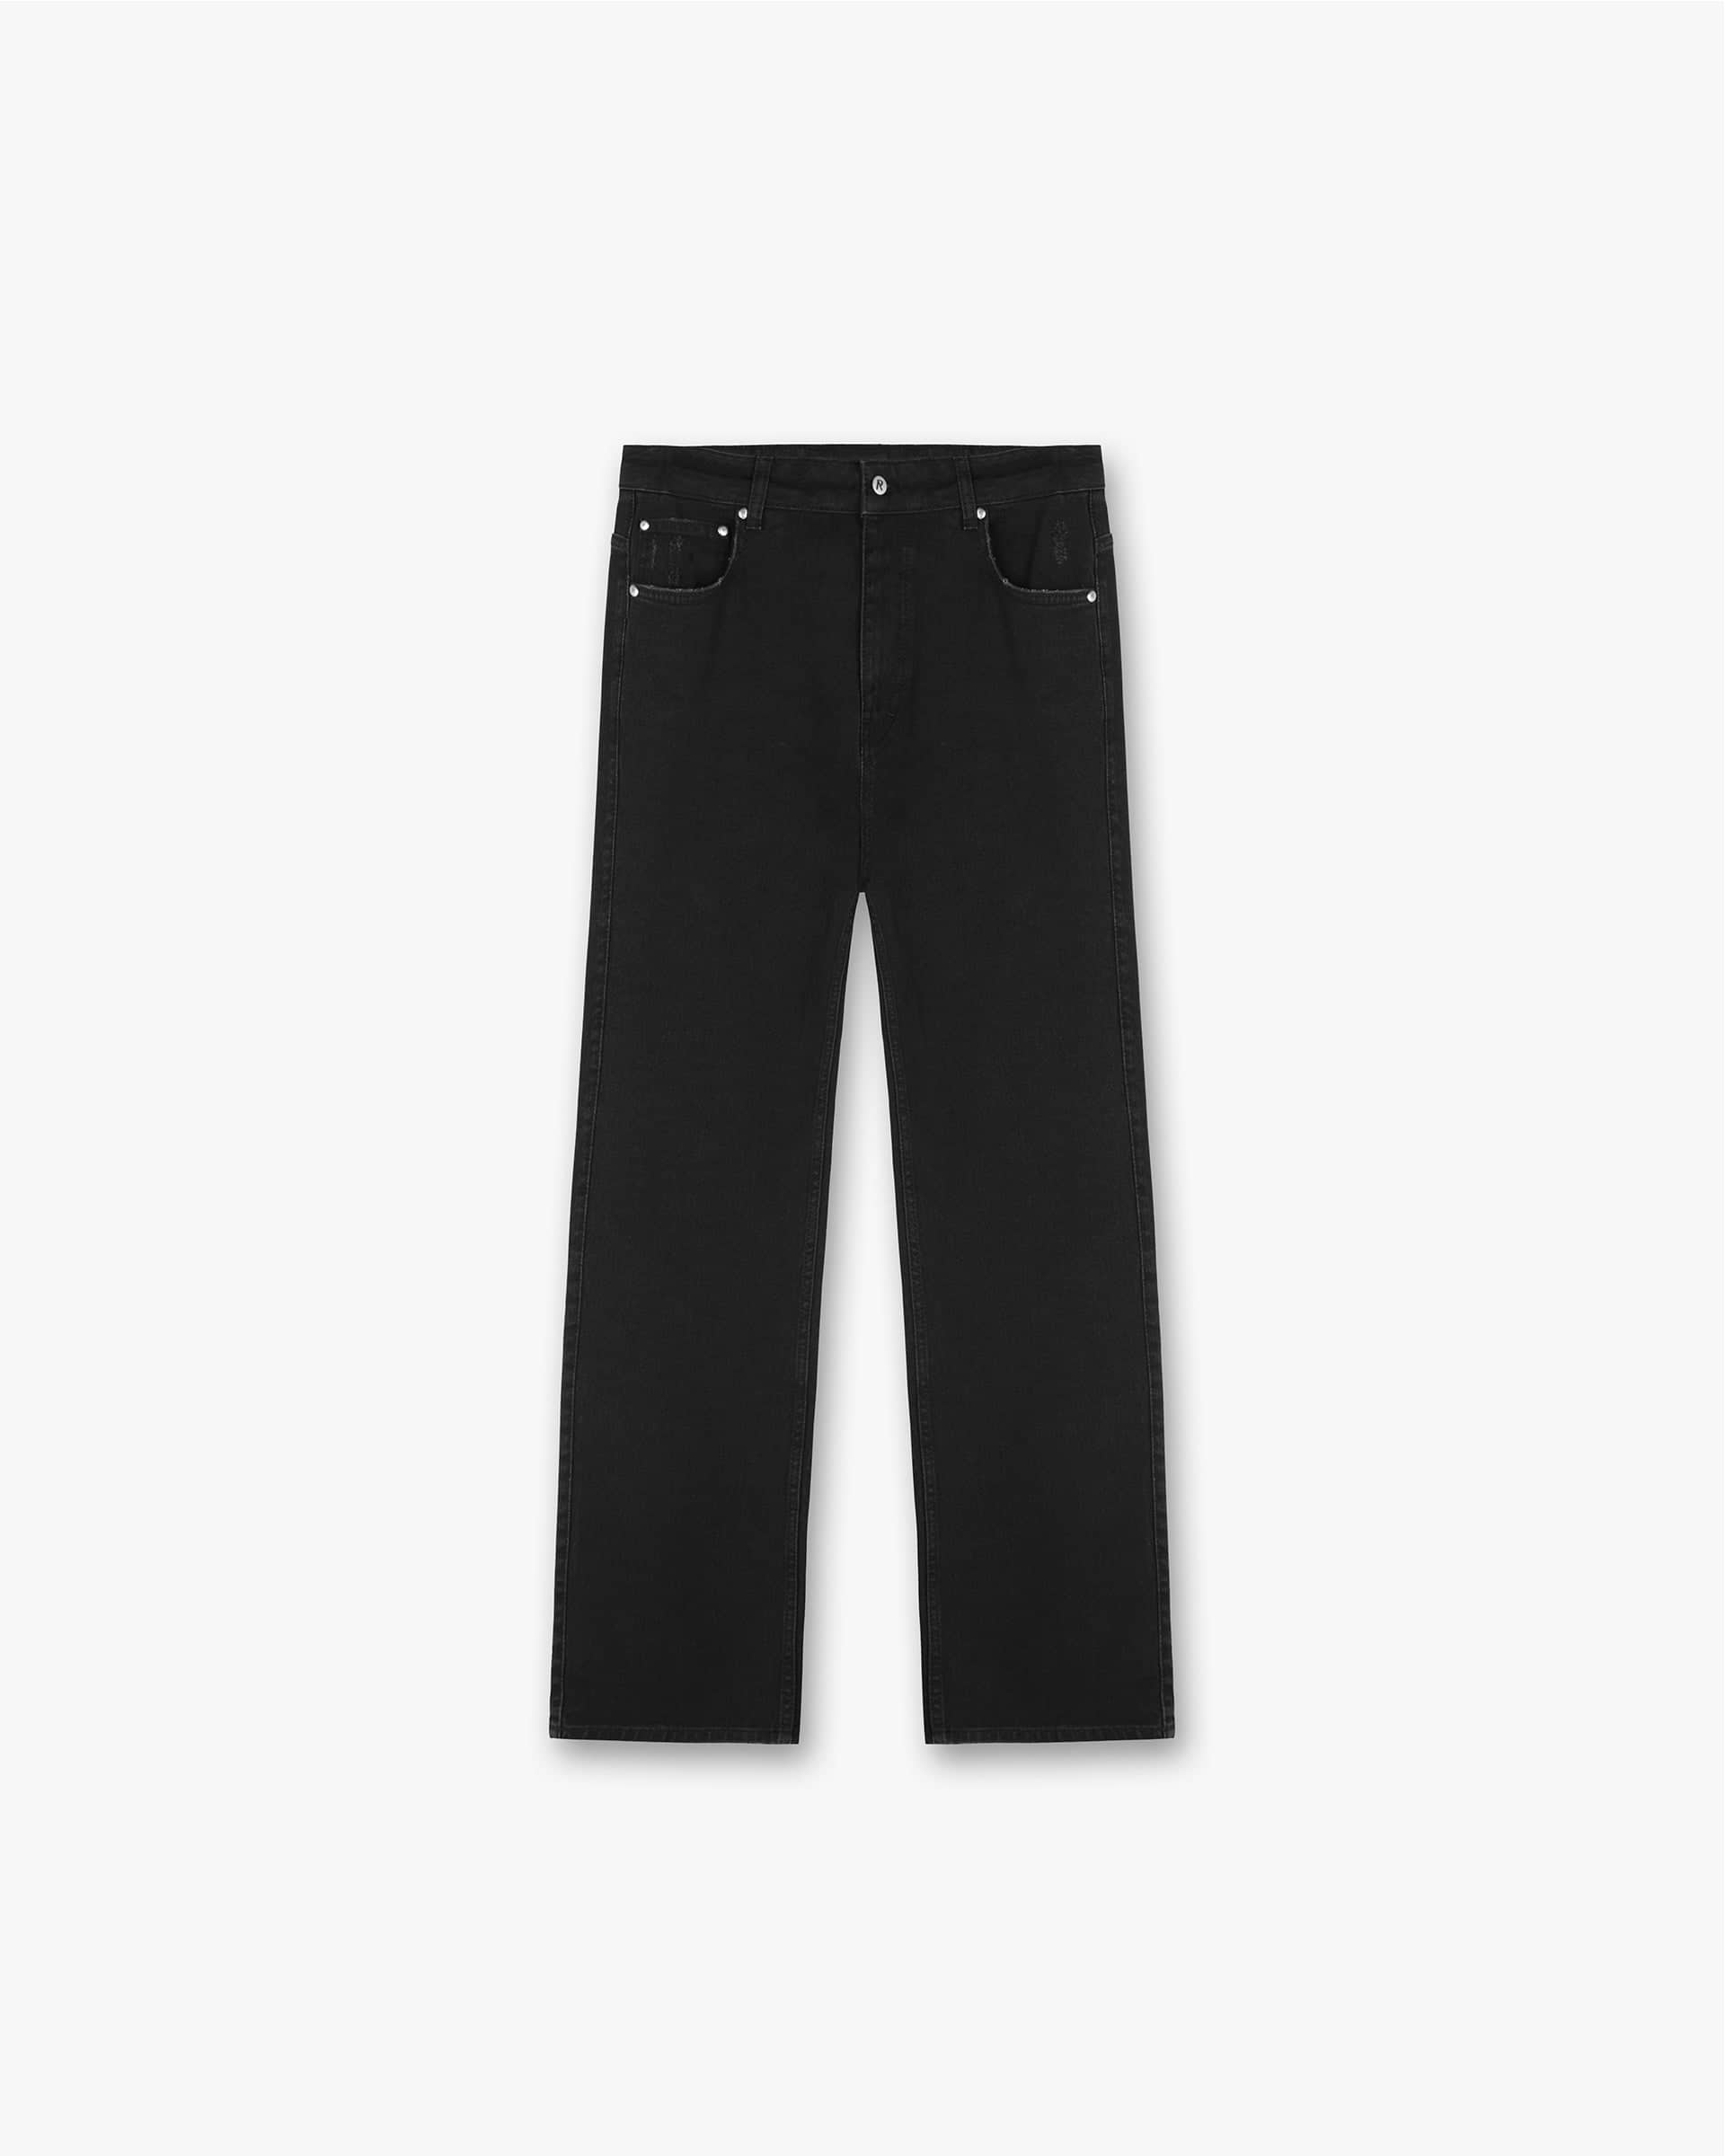 Ripped & Repaired Jeans - Black